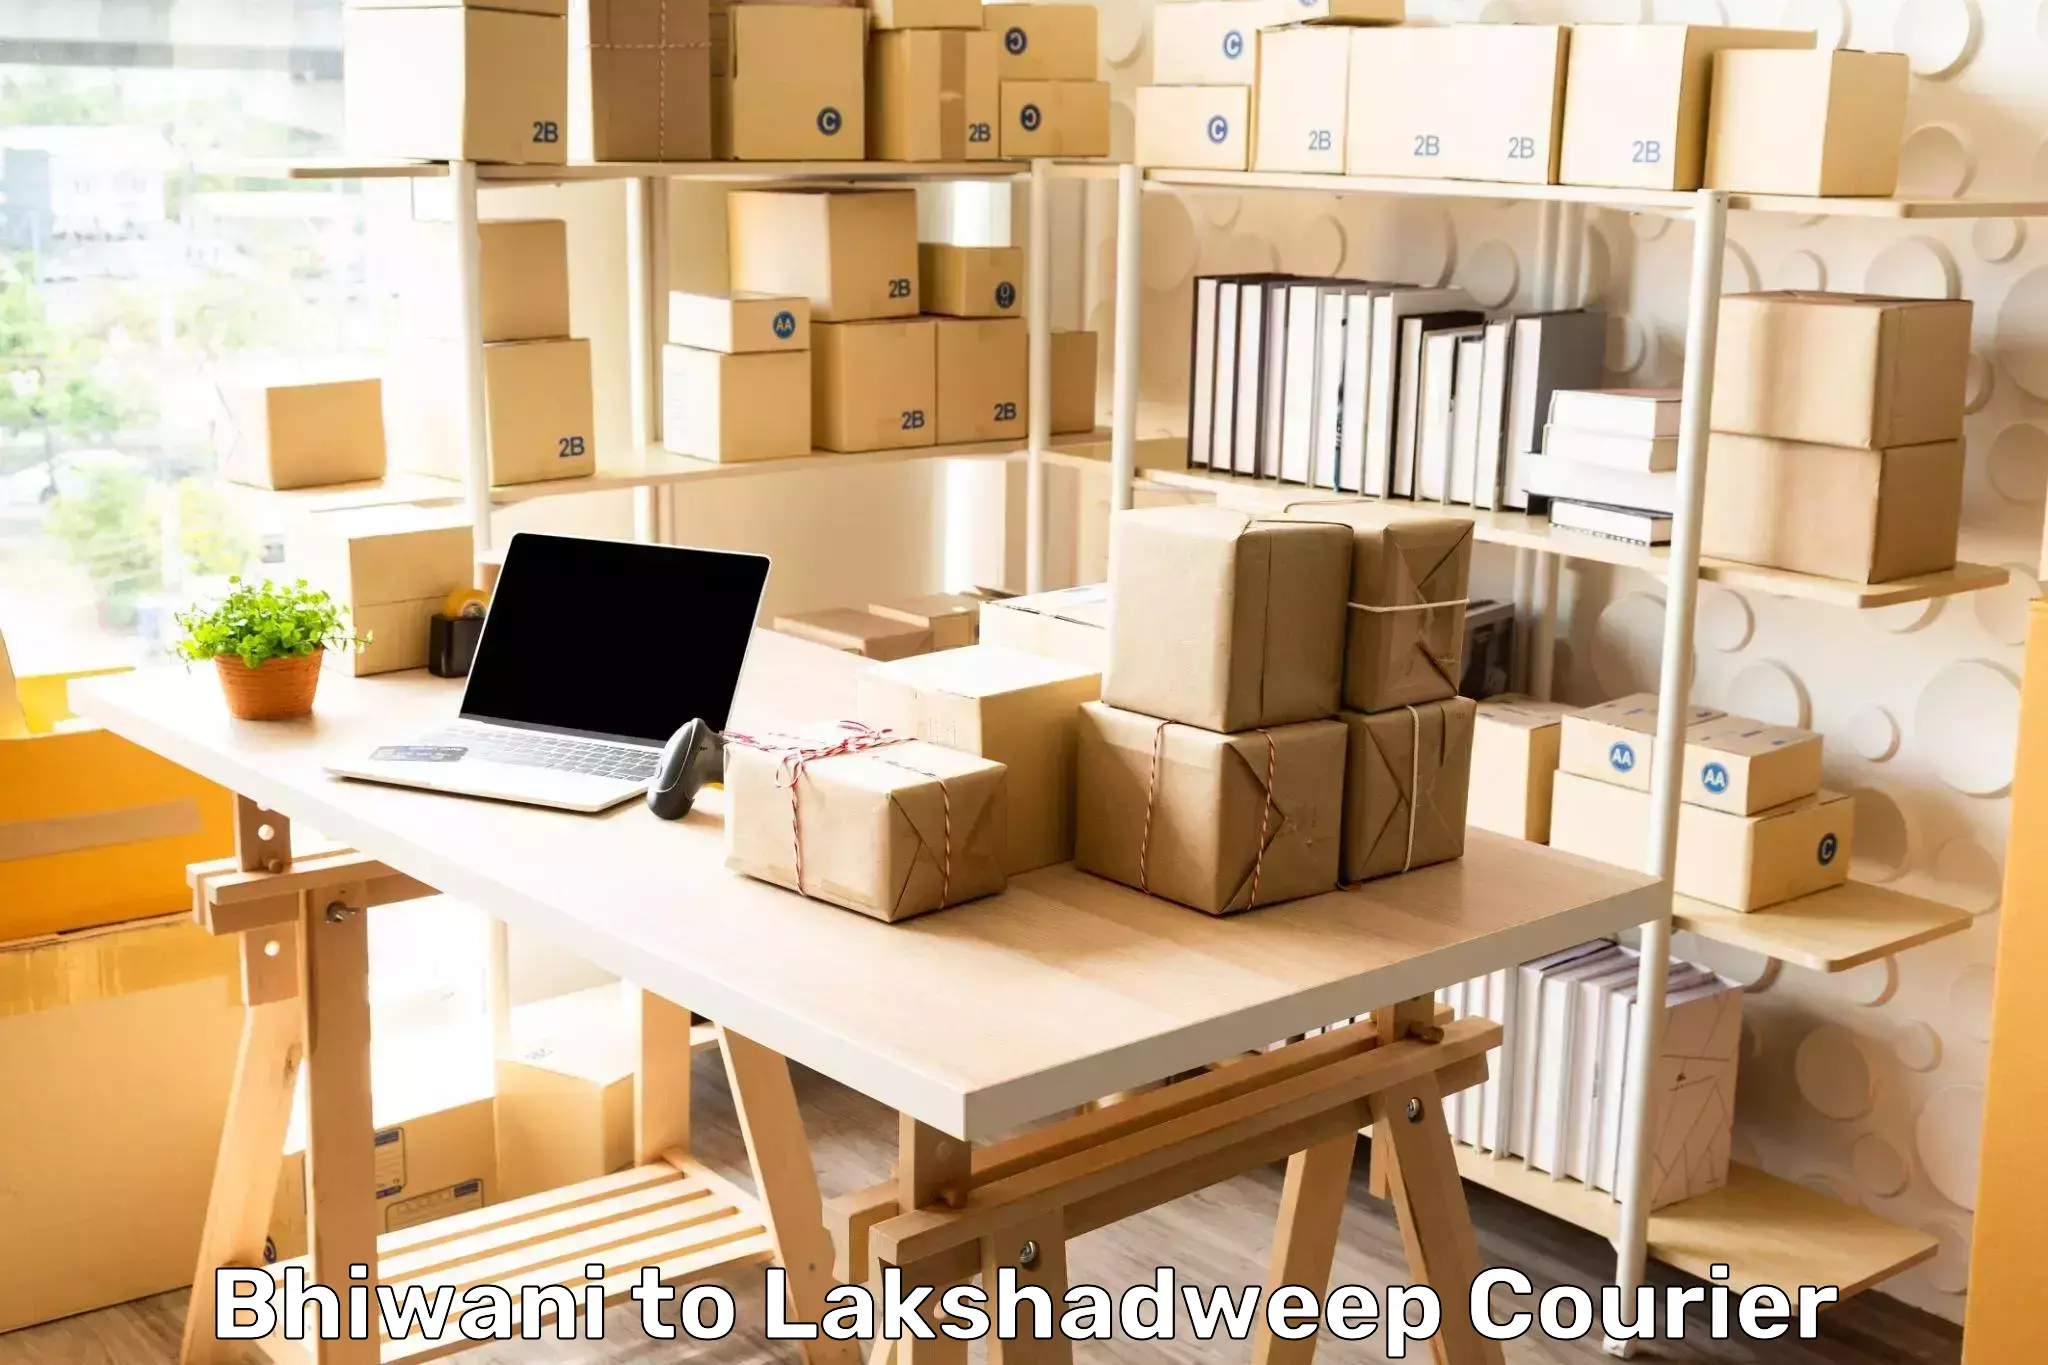 Courier service booking Bhiwani to Lakshadweep